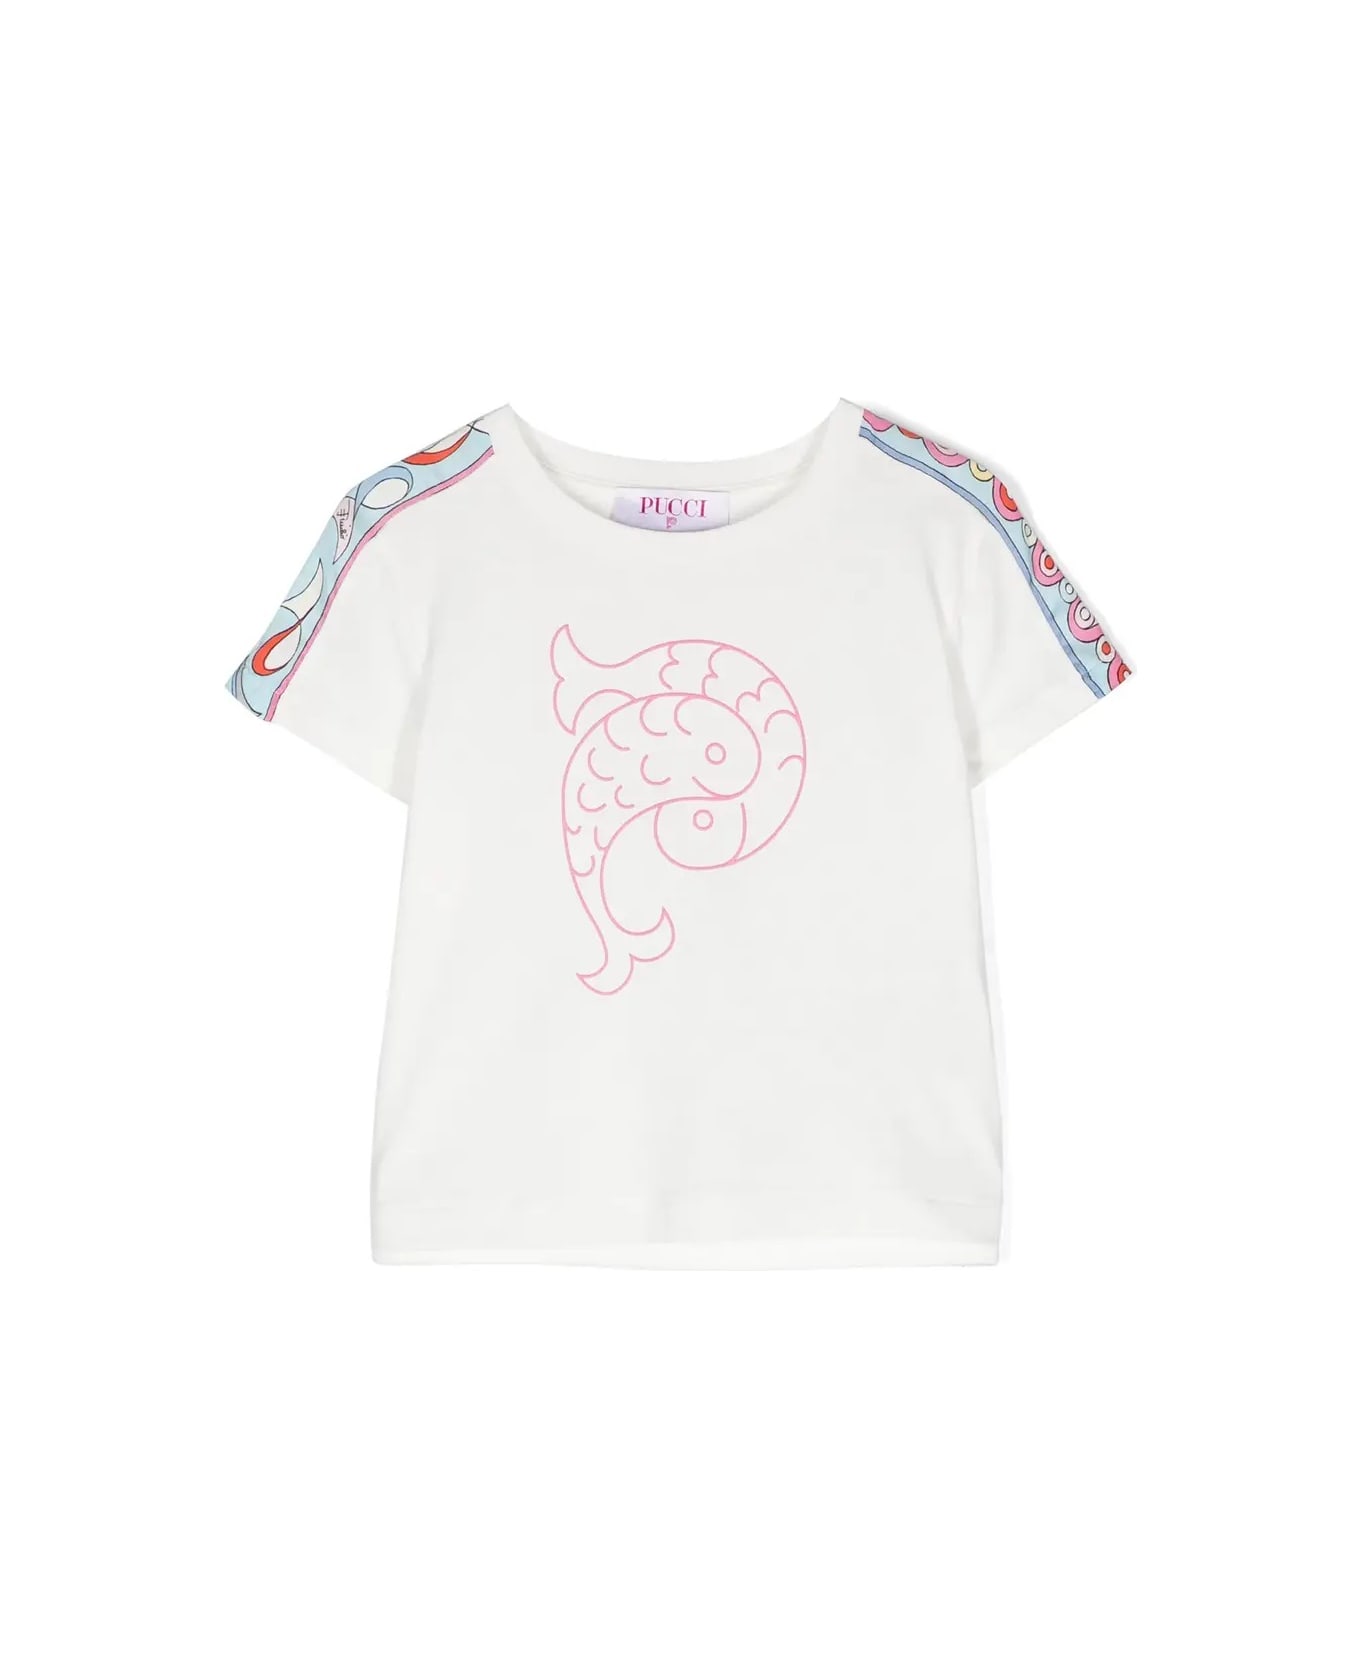 Pucci White T-shirt With Pucci P Print And Printed Ribbons - White Tシャツ＆ポロシャツ